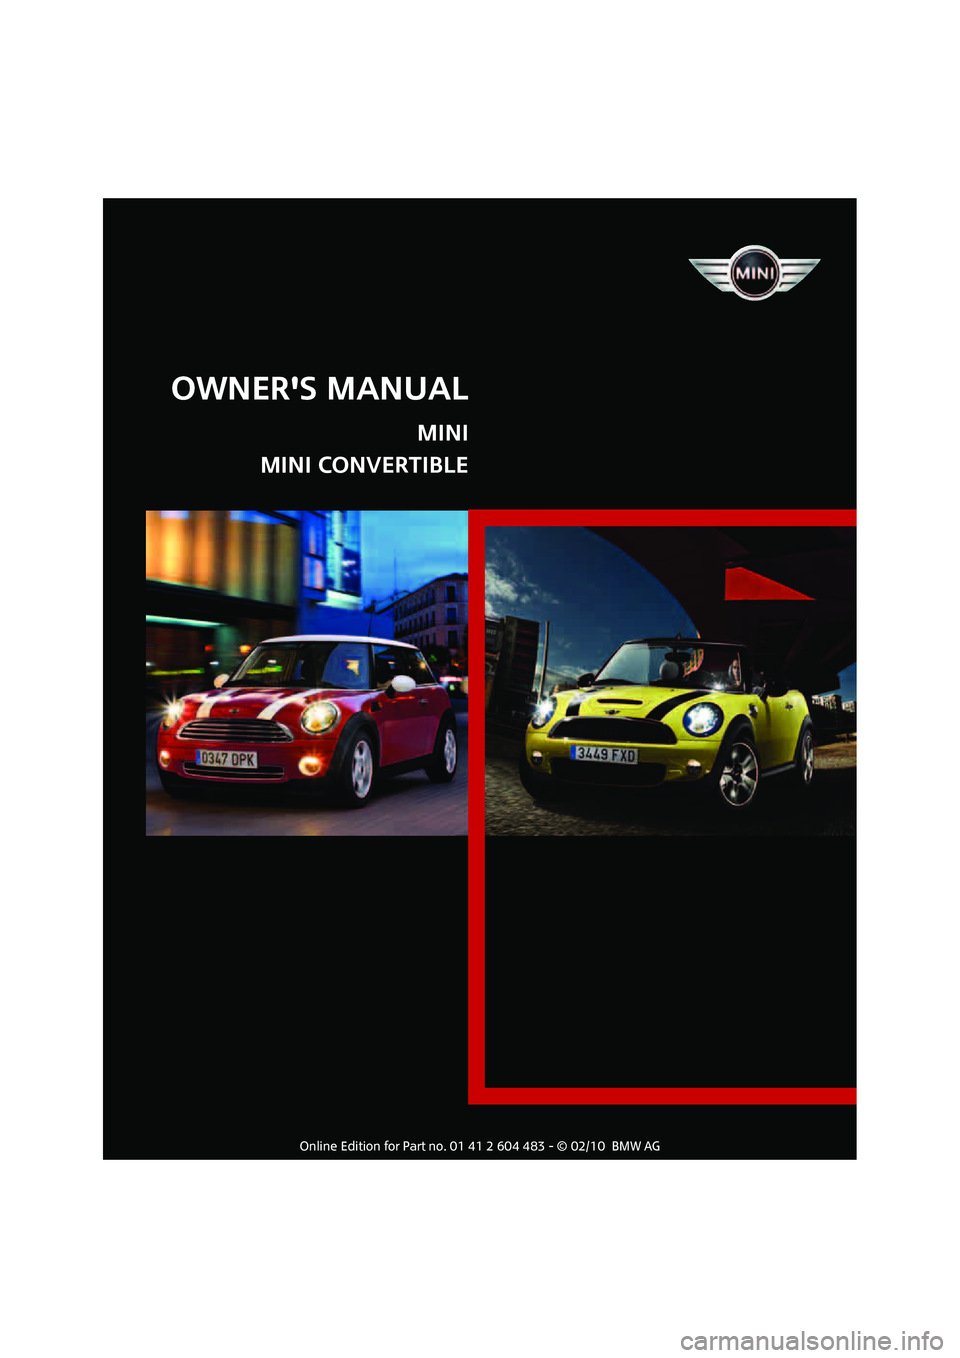 MINI COOPER CONVERTIBLE 2010  Owners Manual   
OWNERS MANUAL
MINI
MINI CONVERTIBLE 